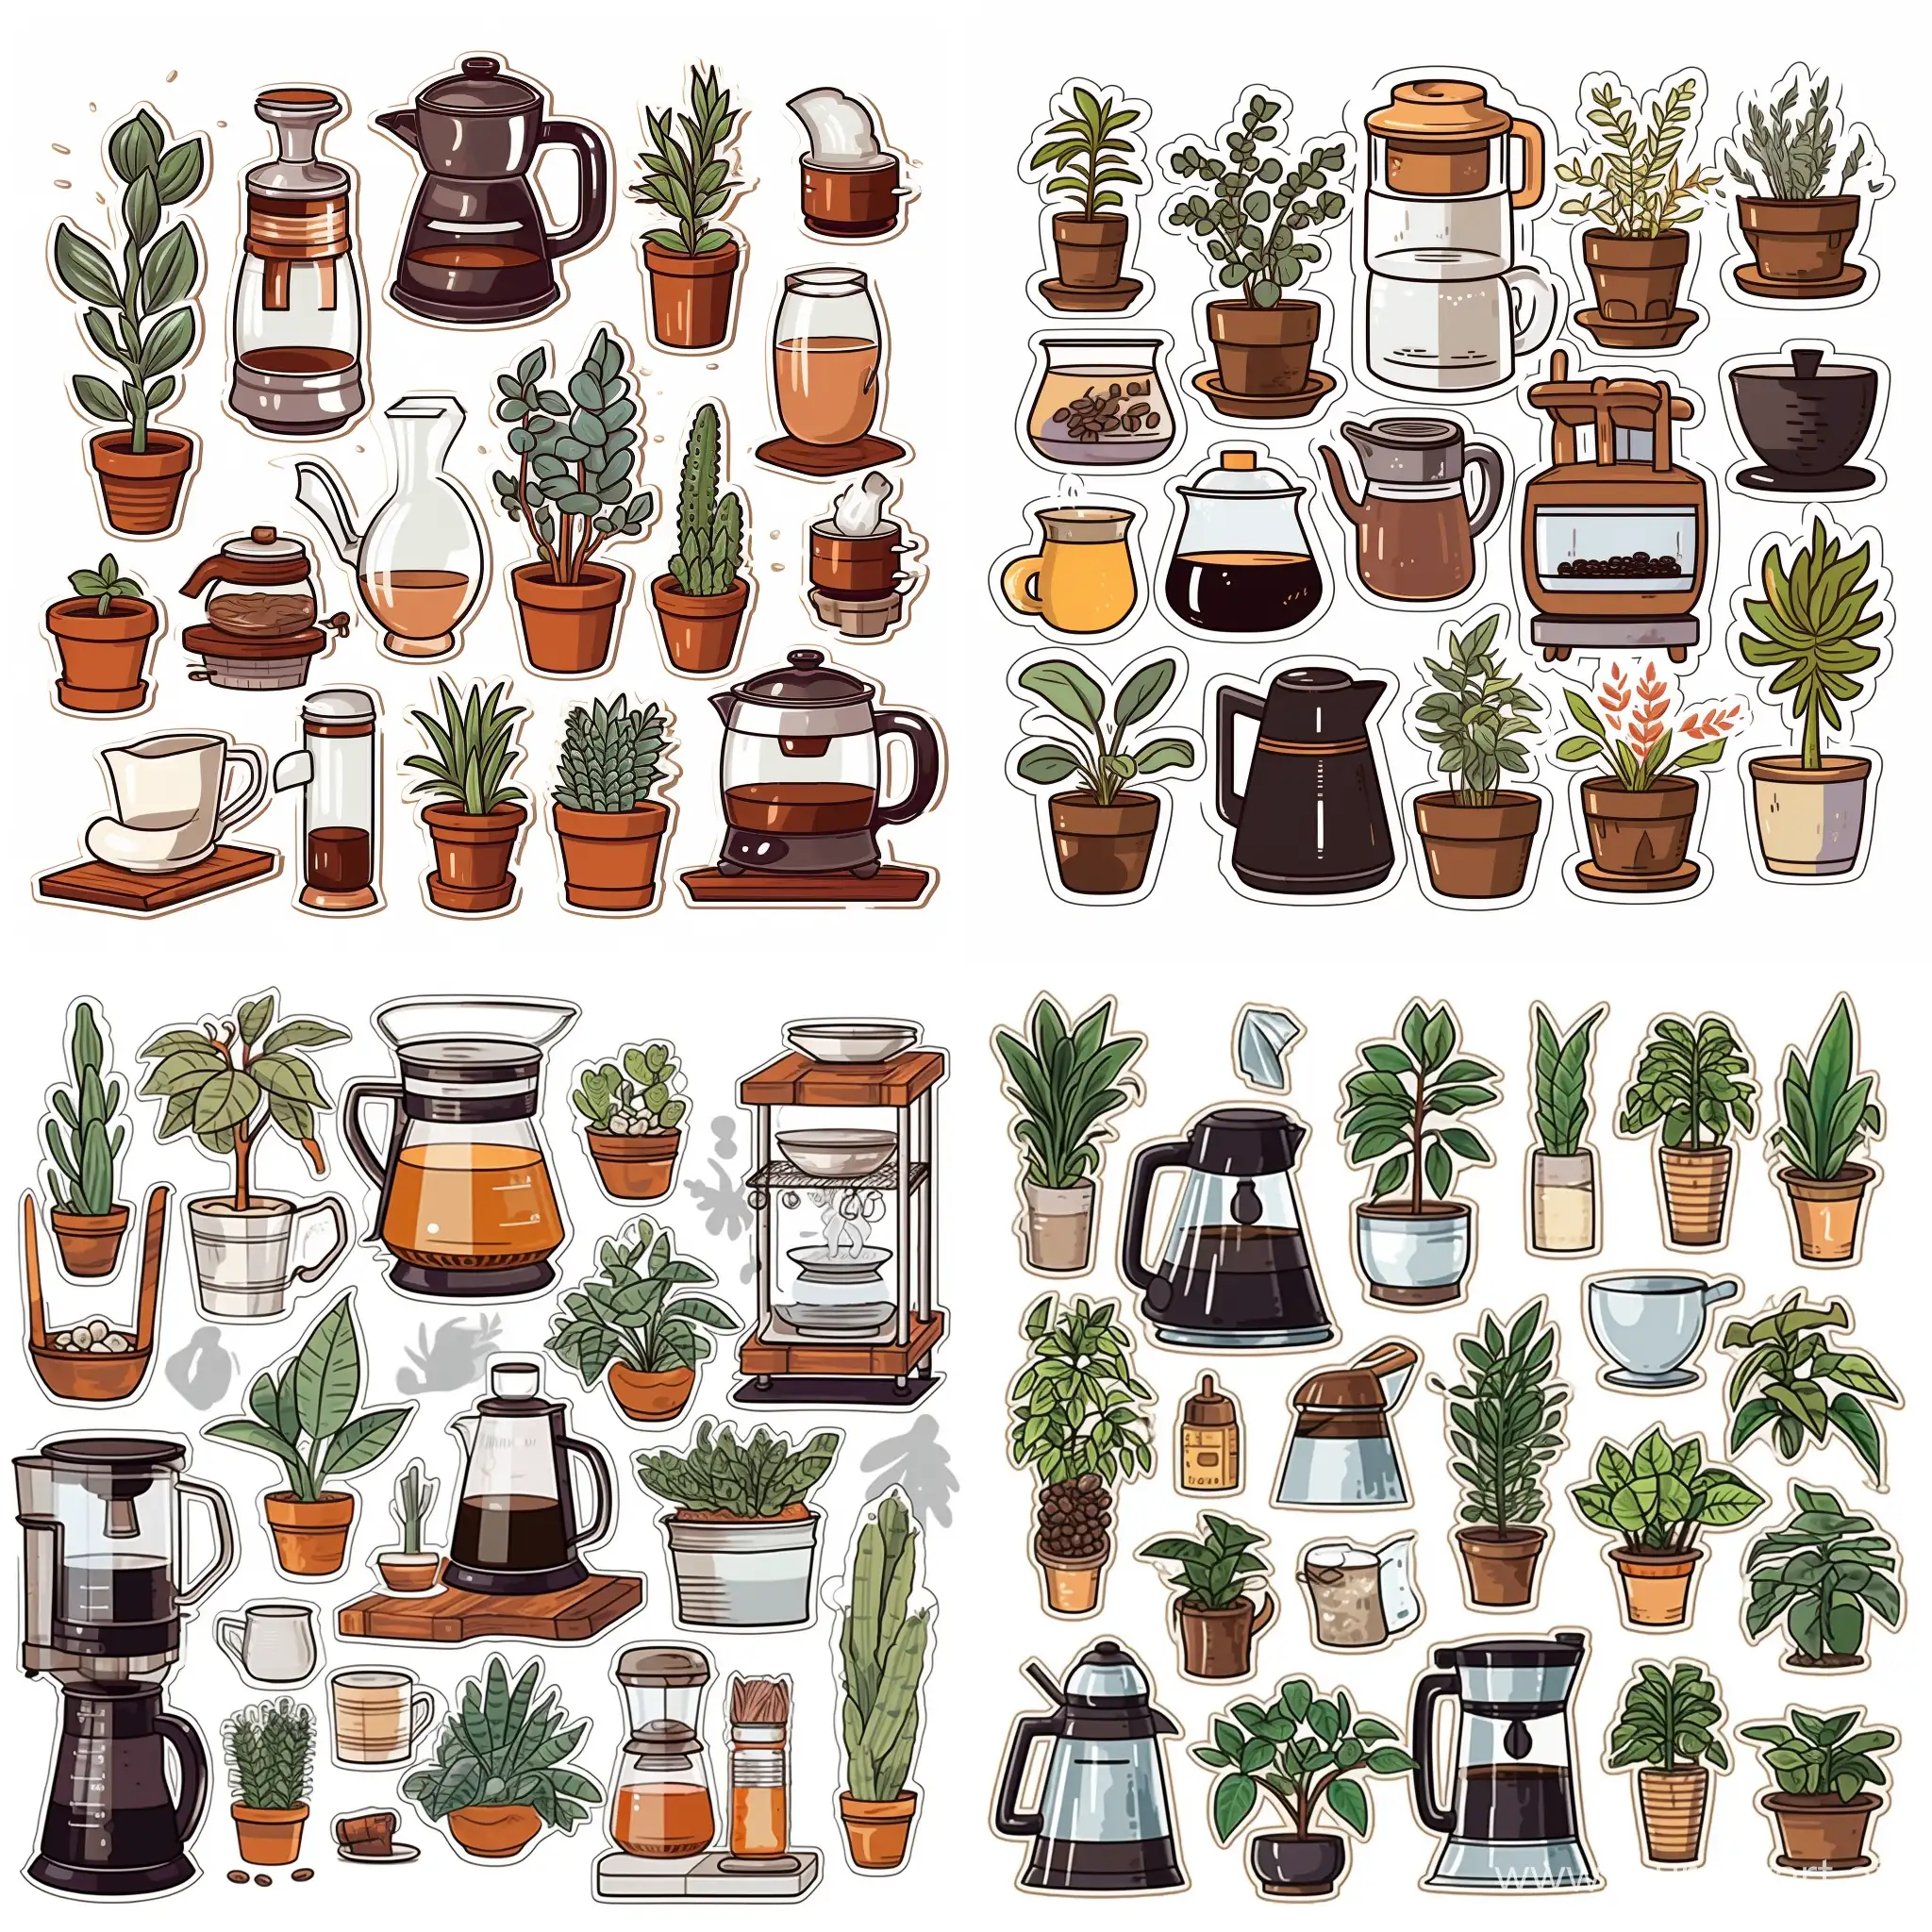 create a set of stickers contains cafe, black coffee, cup of coffee, coffee beans, new coffee machine, V60 coffee, ice drip coffee, plants.

make the background transparent, stroke line size around each sticker, hand-drawn. each sticker size 1:1